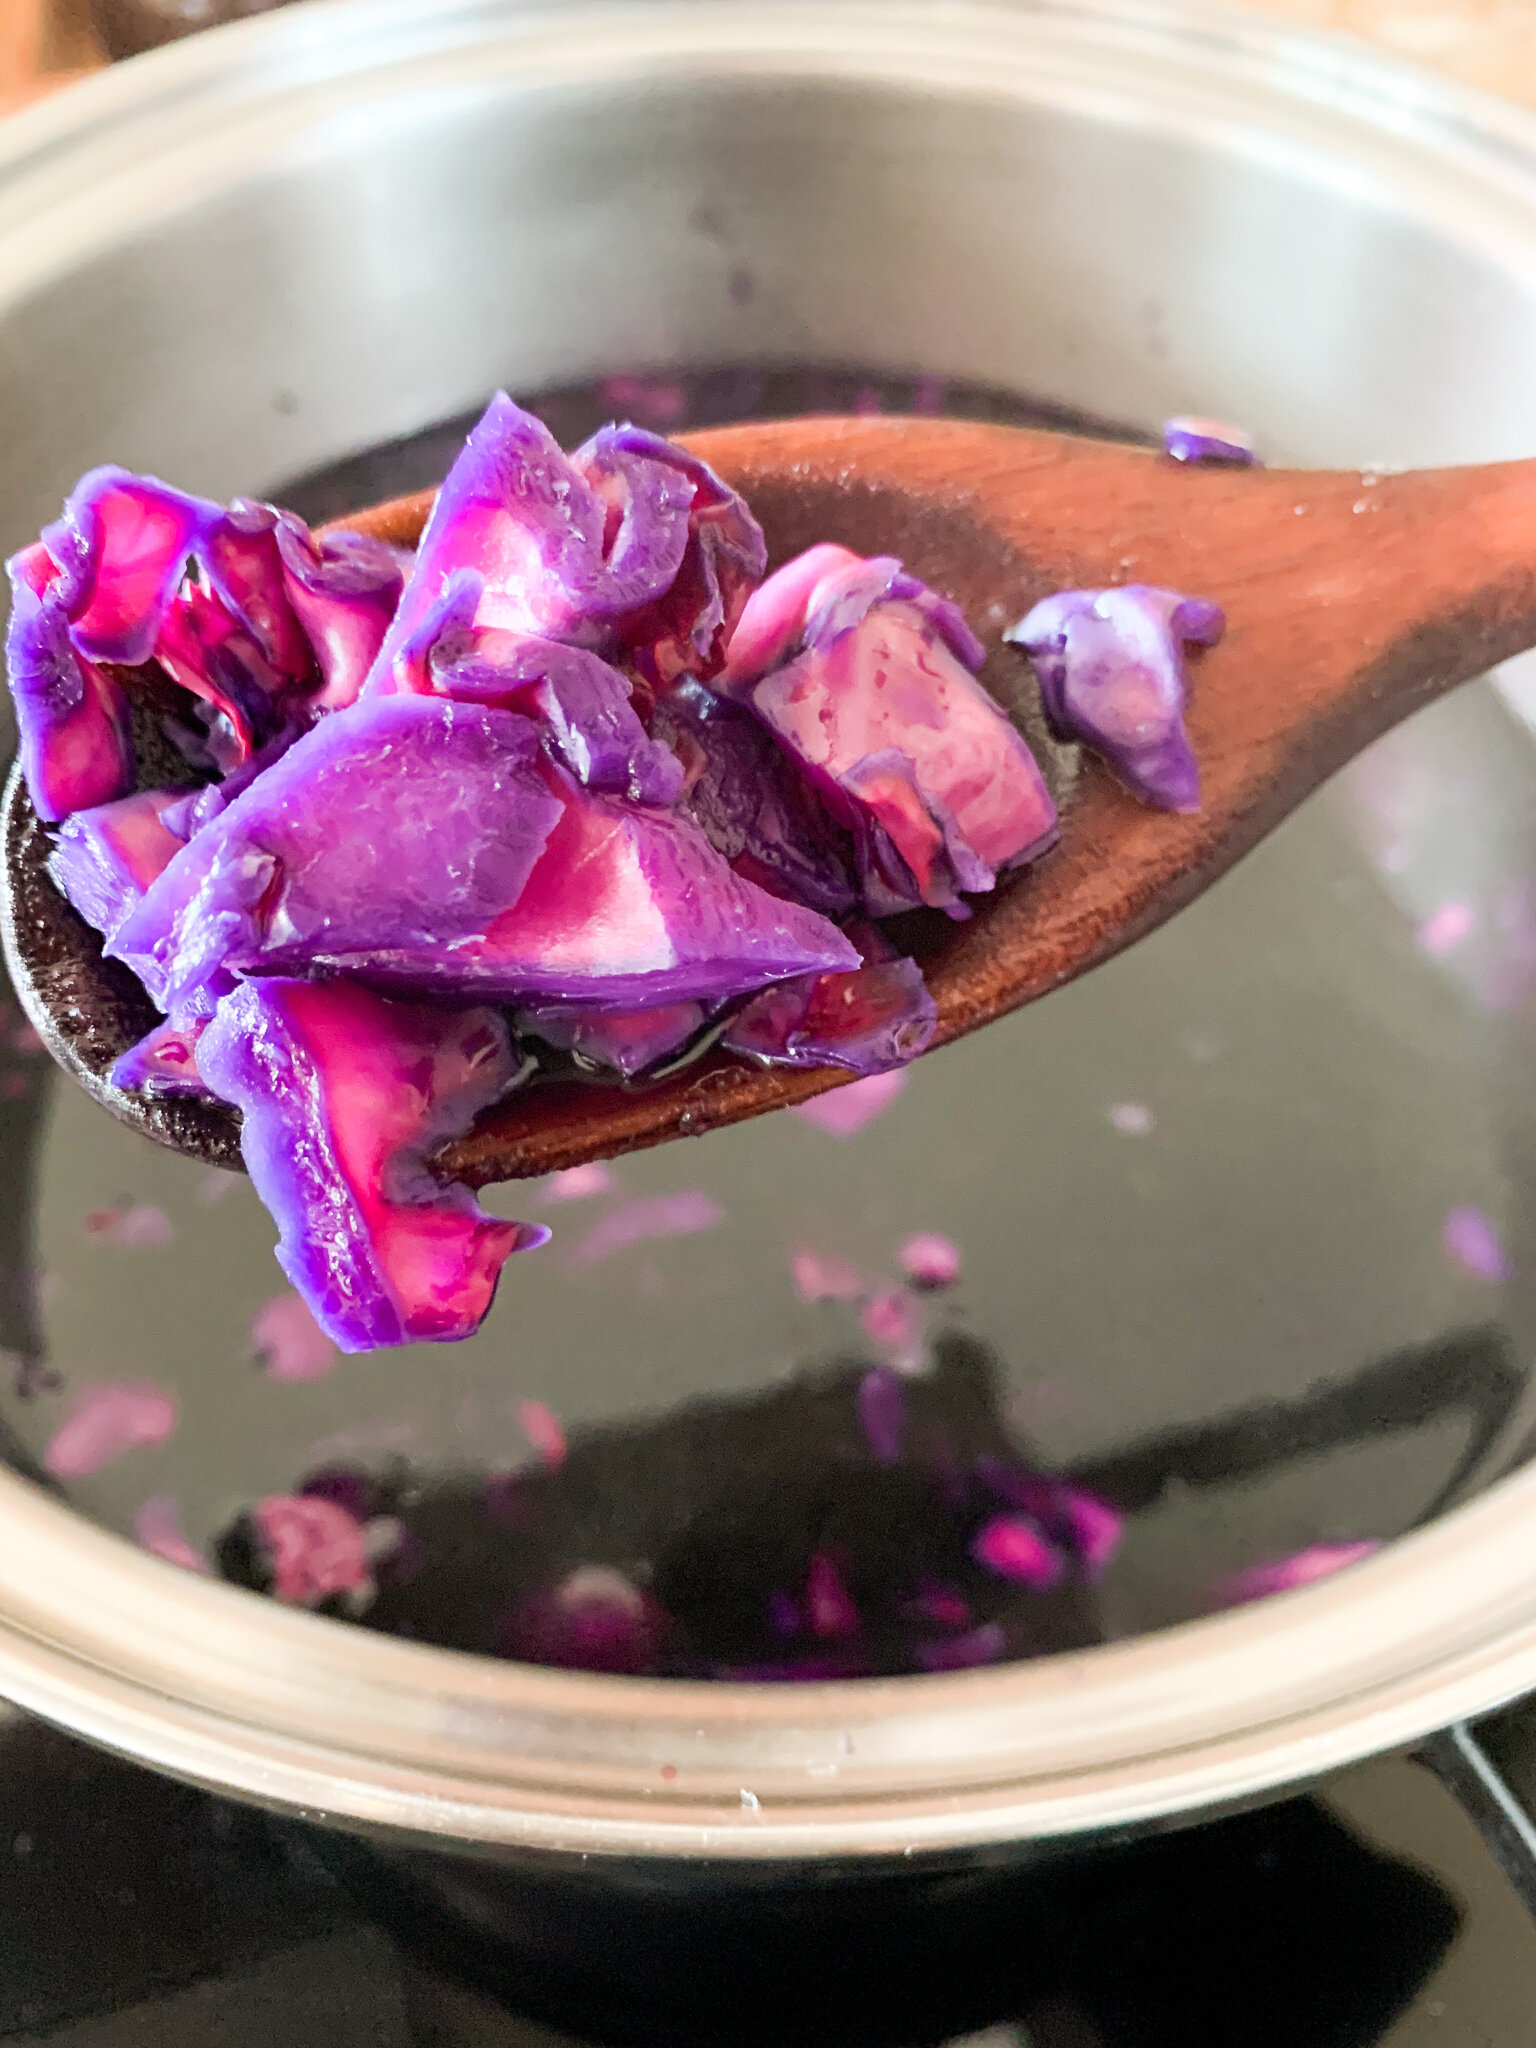 How To Dye Cotton Blue With Red Cabbage (No Mordant) - Sew Historically